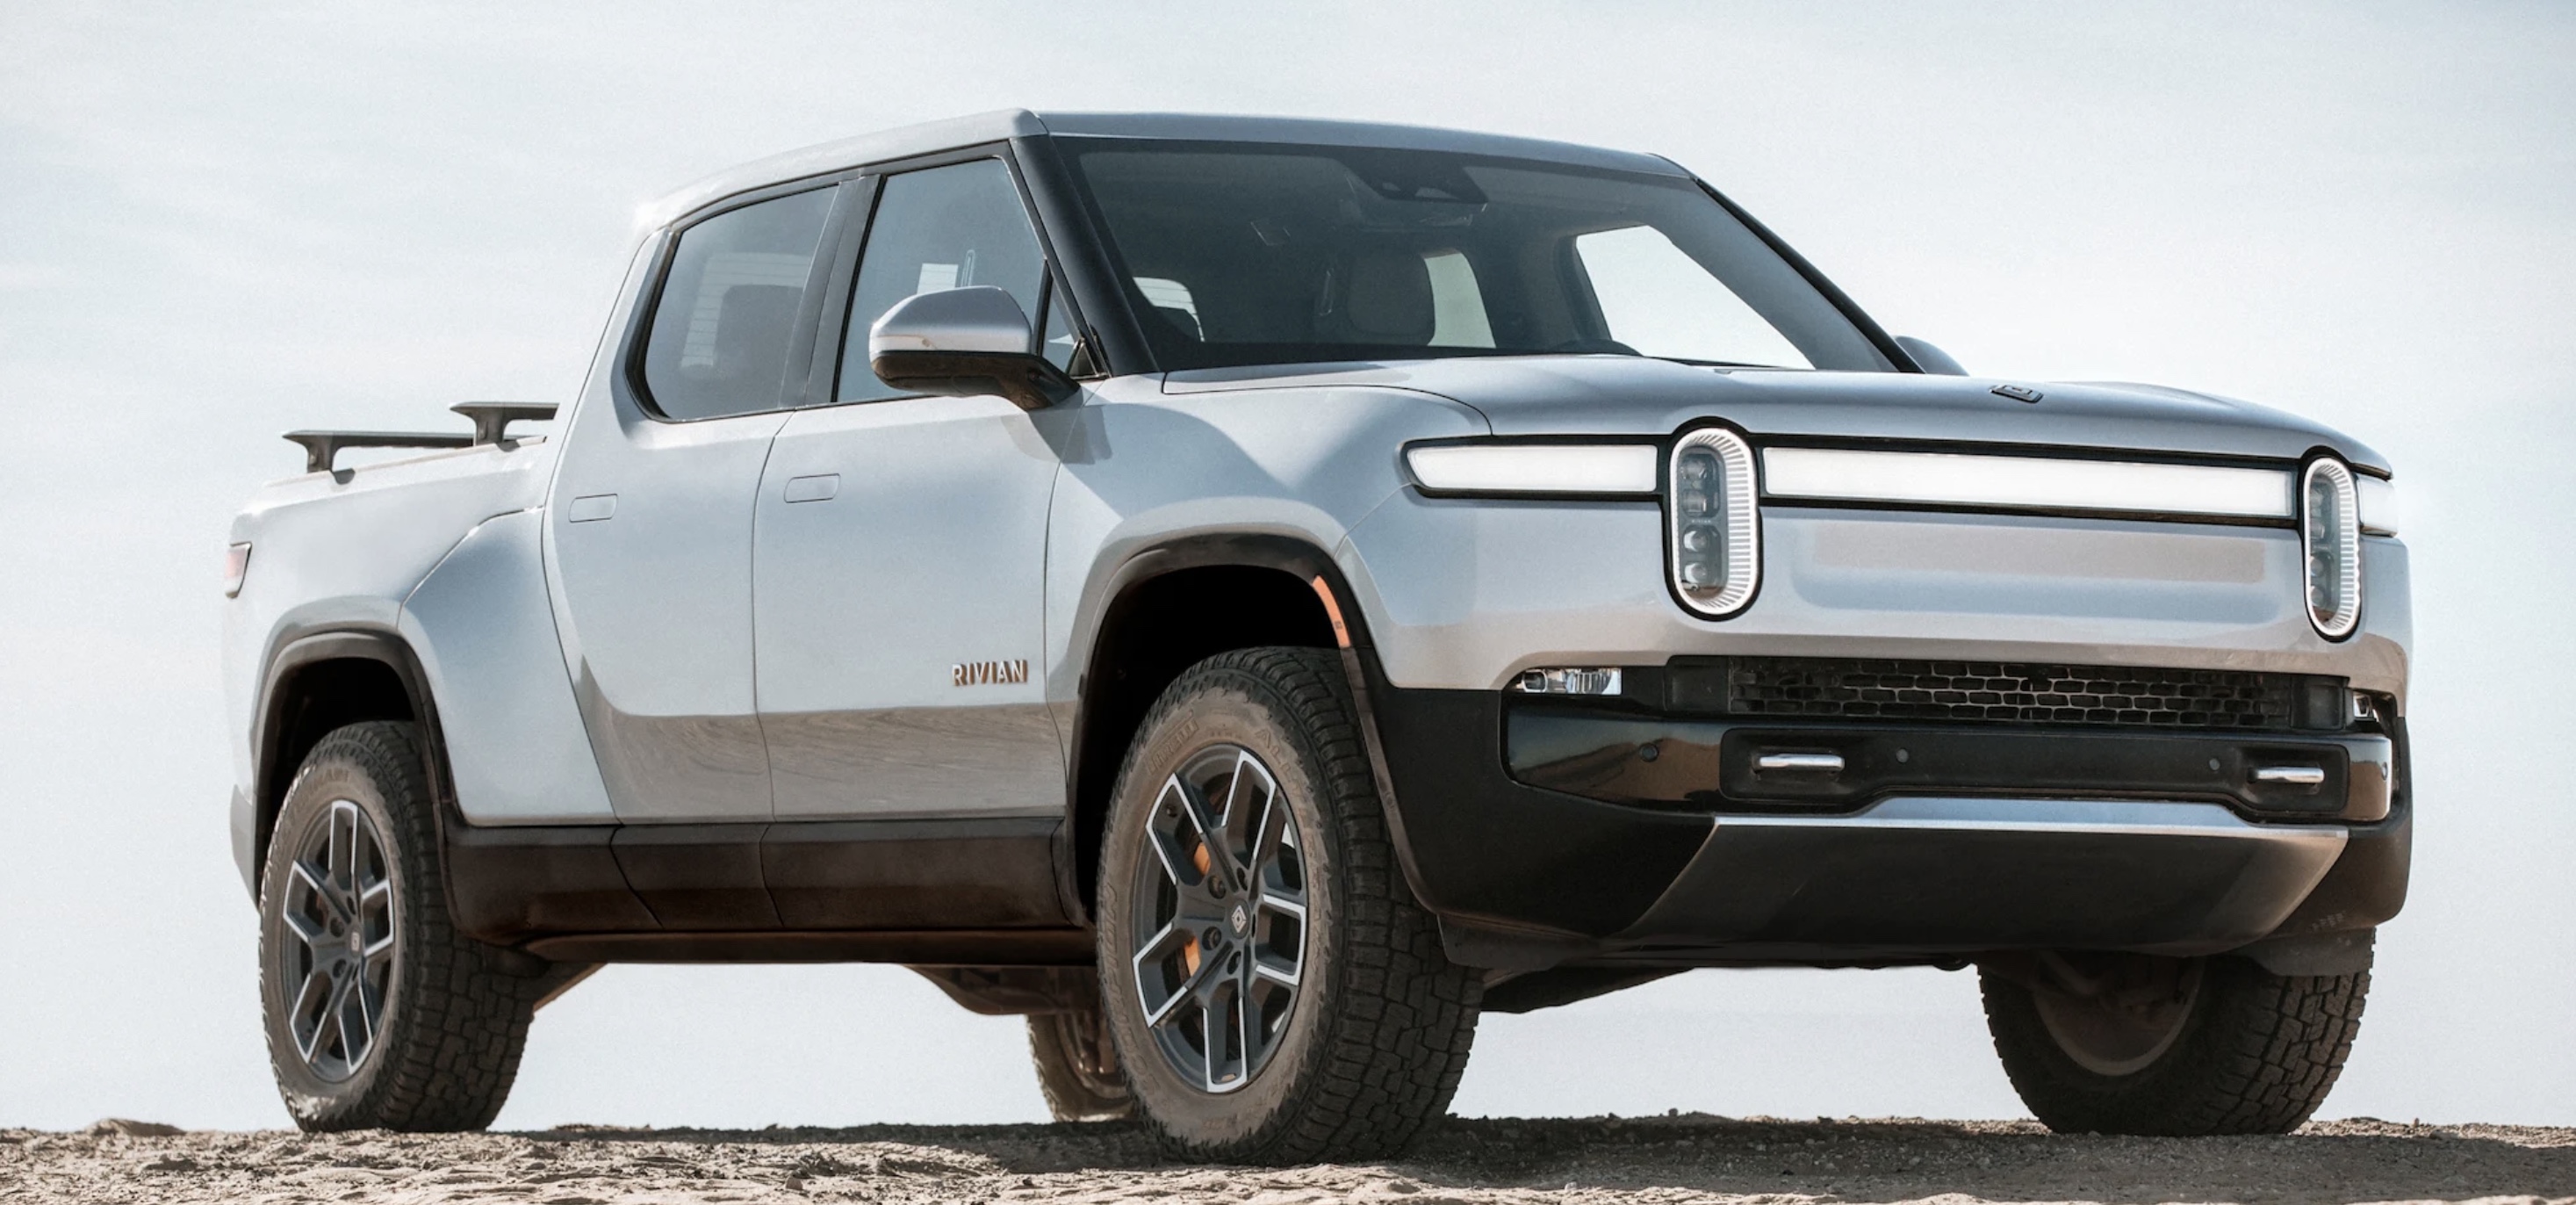 Rivian delays first deliveries of R1T electric pickup truck, starts  contacting buyers - Electrek